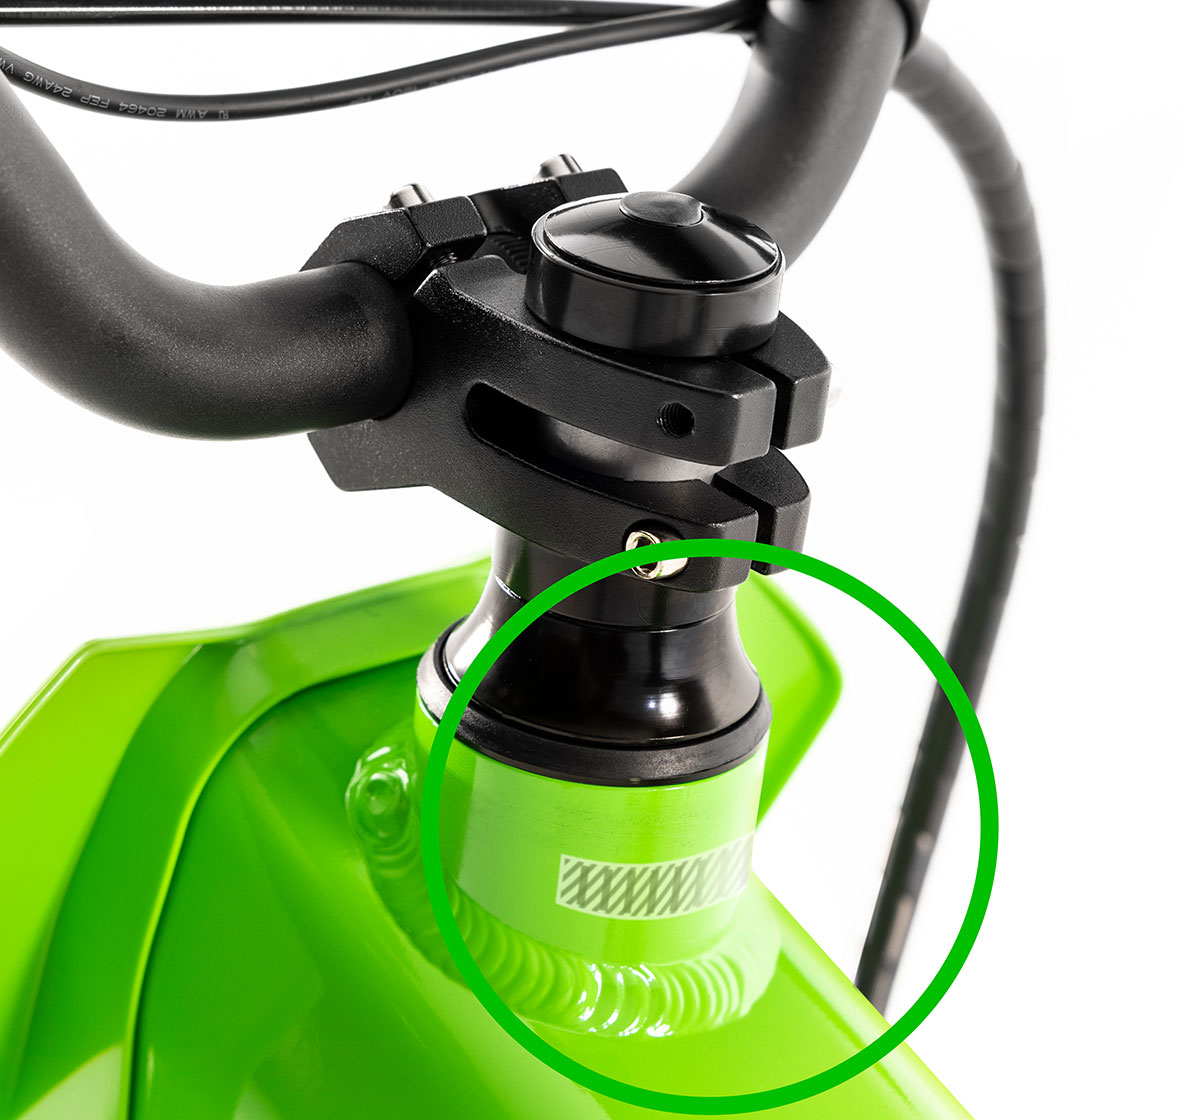 You will find the VIN stamped on the rider’s side of the head tube below the handlebars.